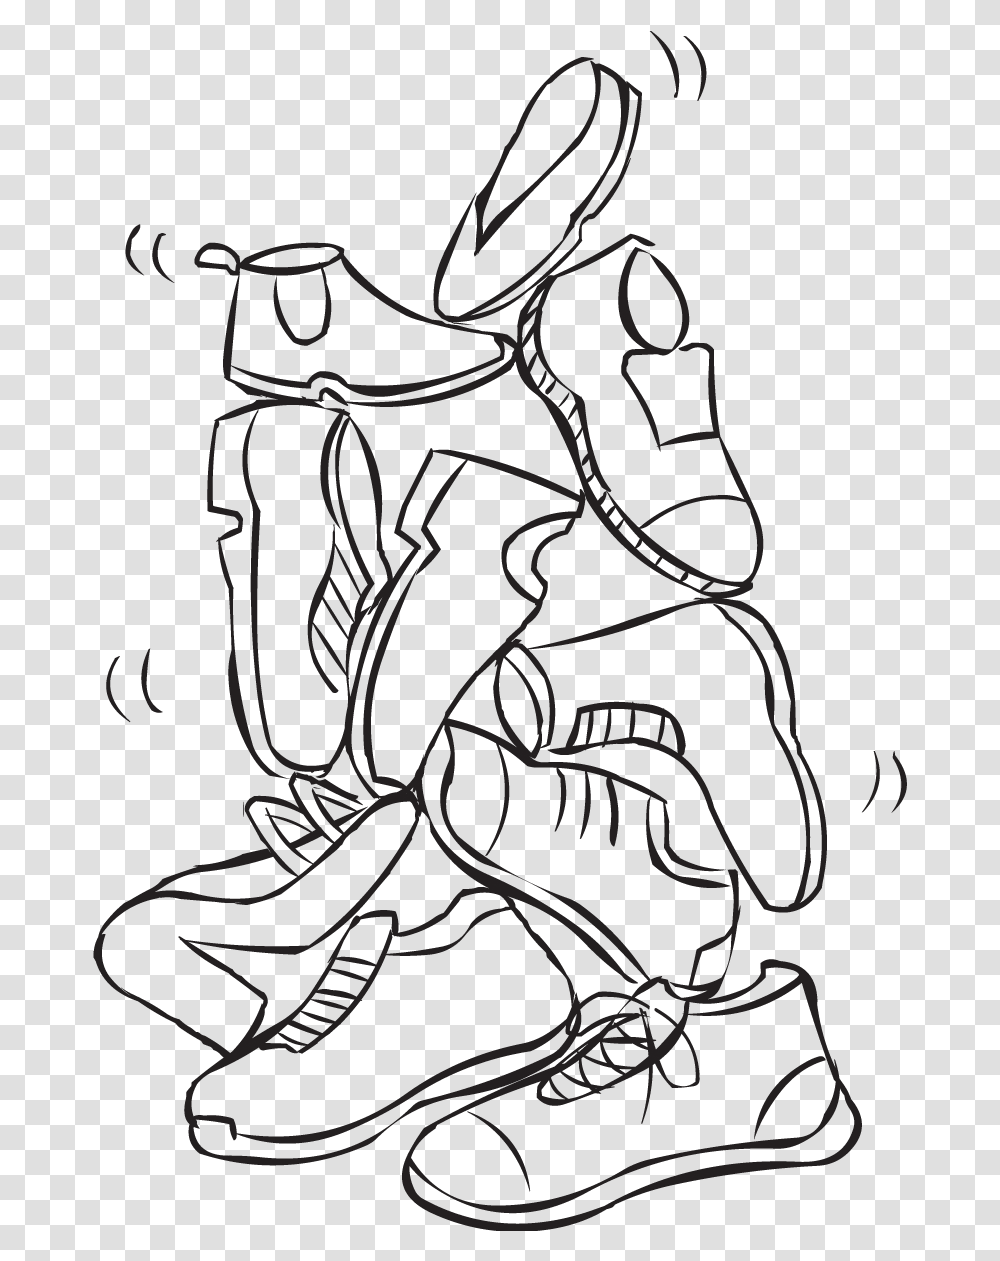 Bunch Of Shoes Stacked On Top Of Each Other To Form Line Art, Tree, Plant, Christmas Tree, Ornament Transparent Png